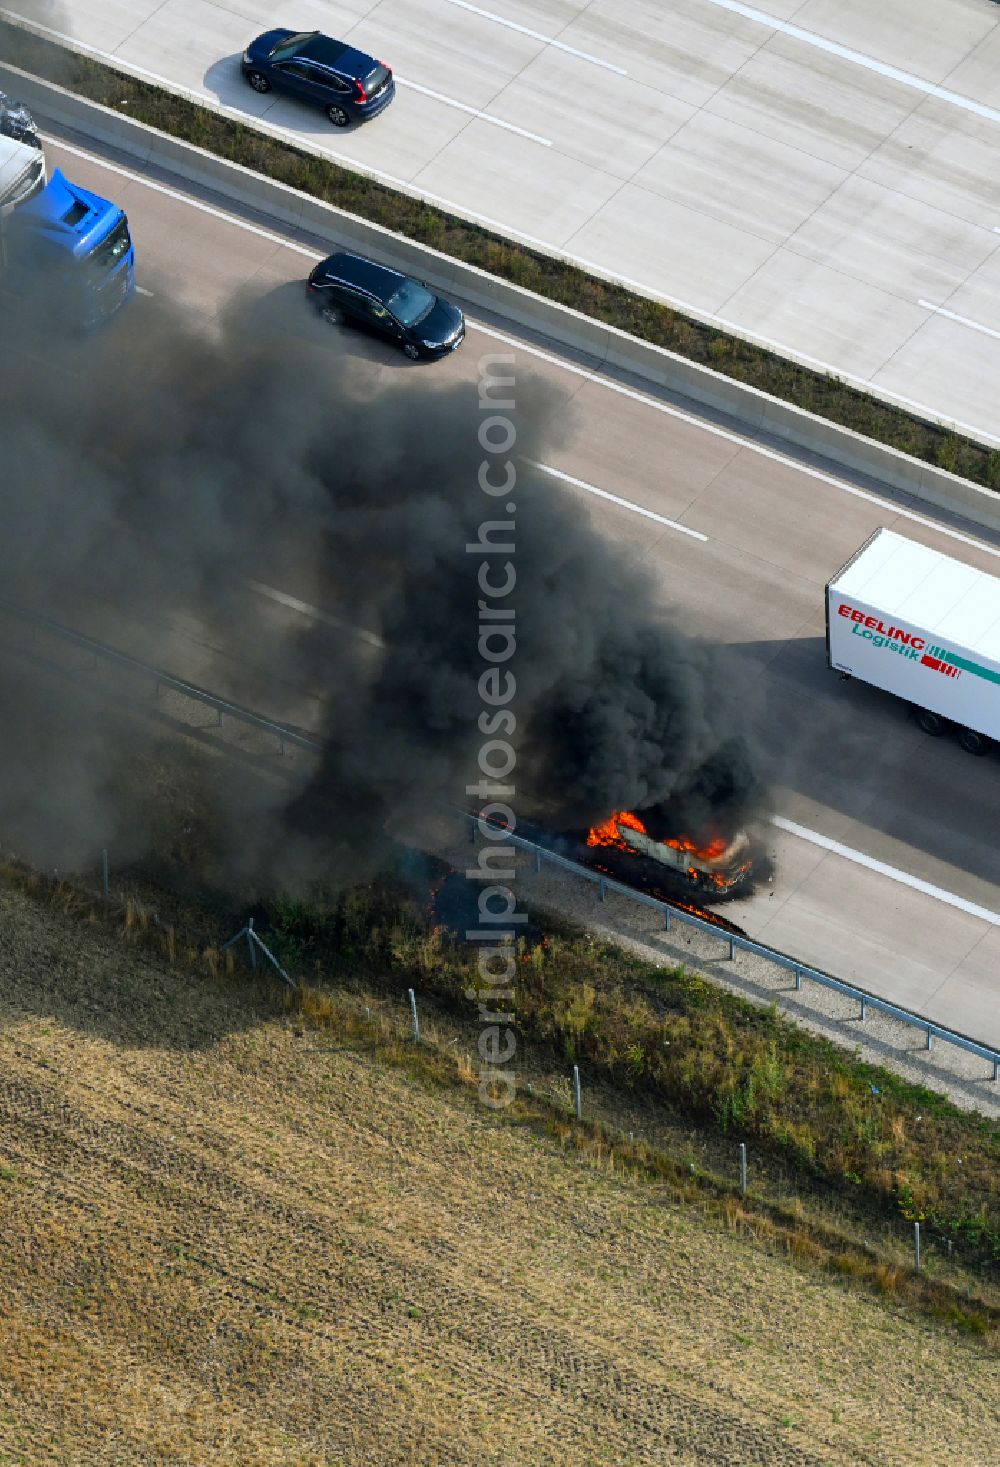 Buchholz (Aller) from the bird's eye view: Smoke and flames from a motor vehicle fire in a passenger car on the A7 motorway in Buchholz (Aller) in the state Lower Saxony, Germany